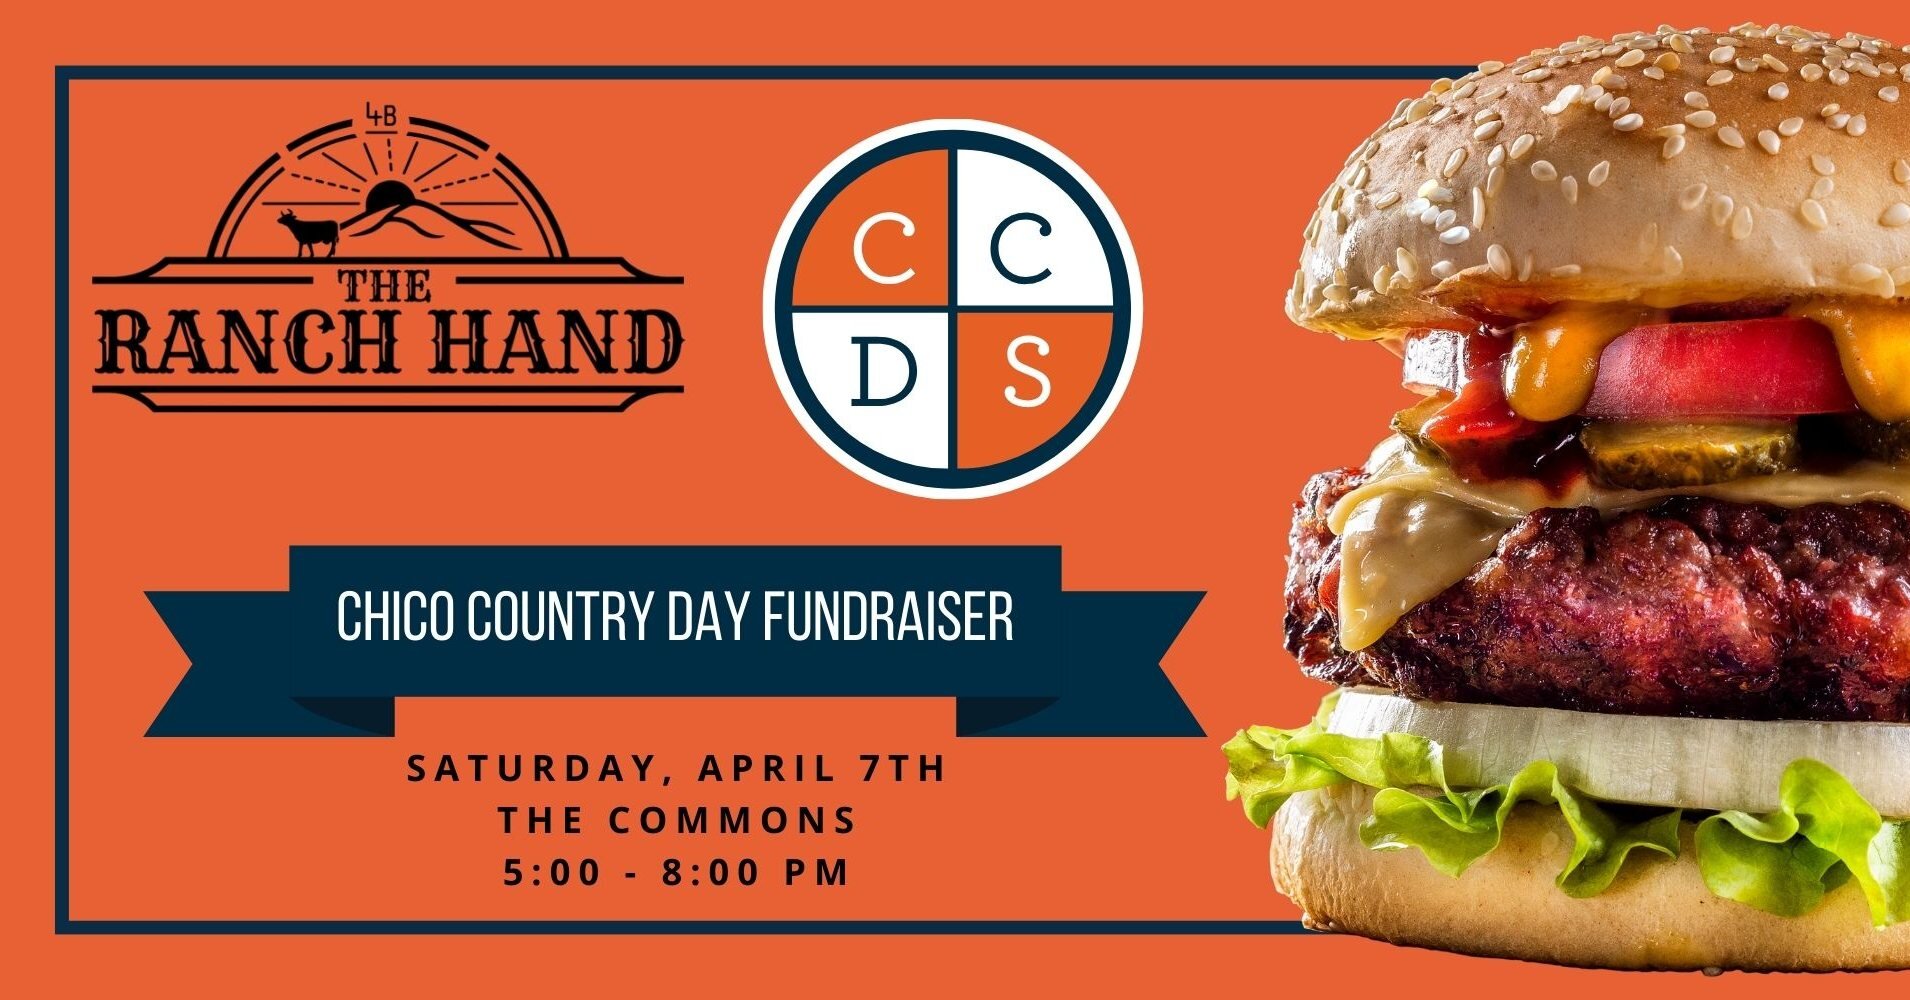 We closed early today because we are attending a private fundraiser for the Country Day School! 

See us tomorrow at The Bunk House from 11 -3 pm!